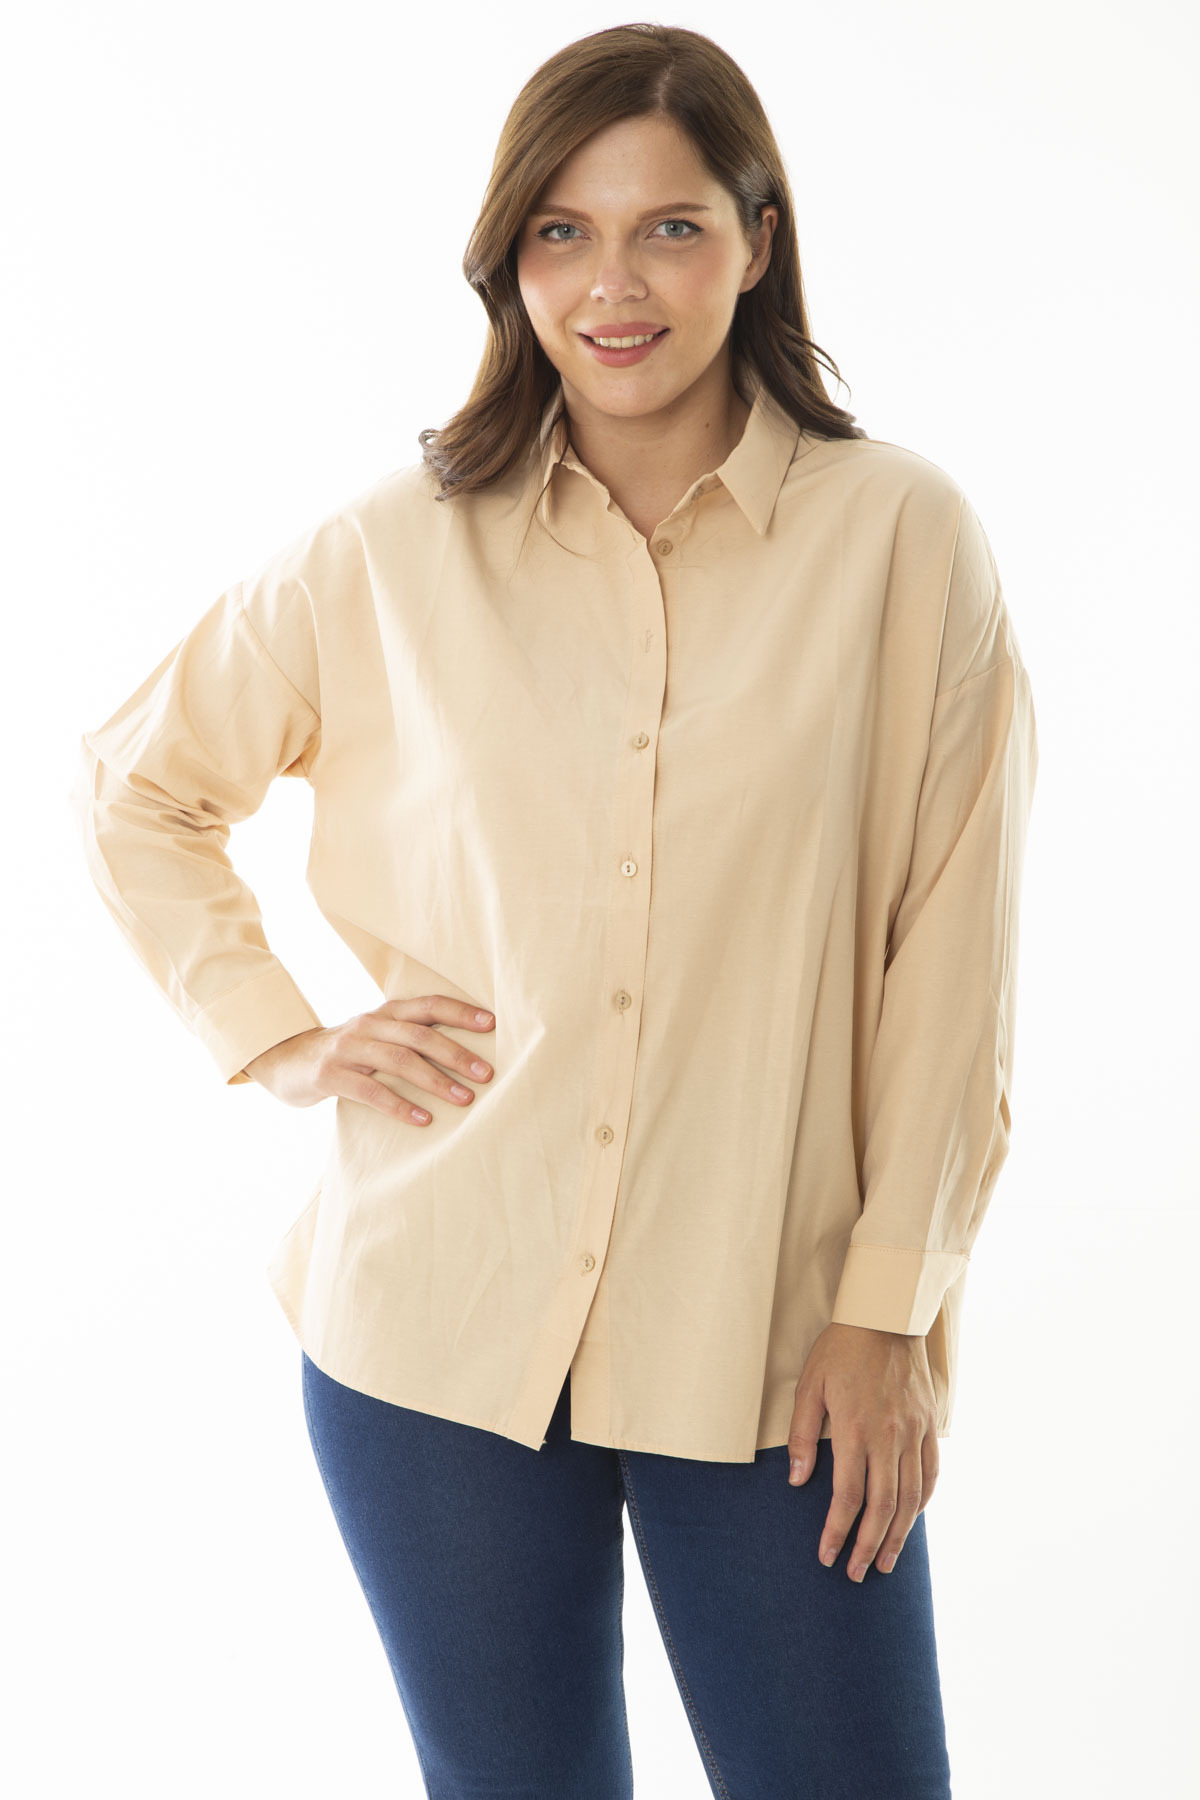 Şans Women's Plus Size Beige Shirt with Front Buttons and Long Sleeves